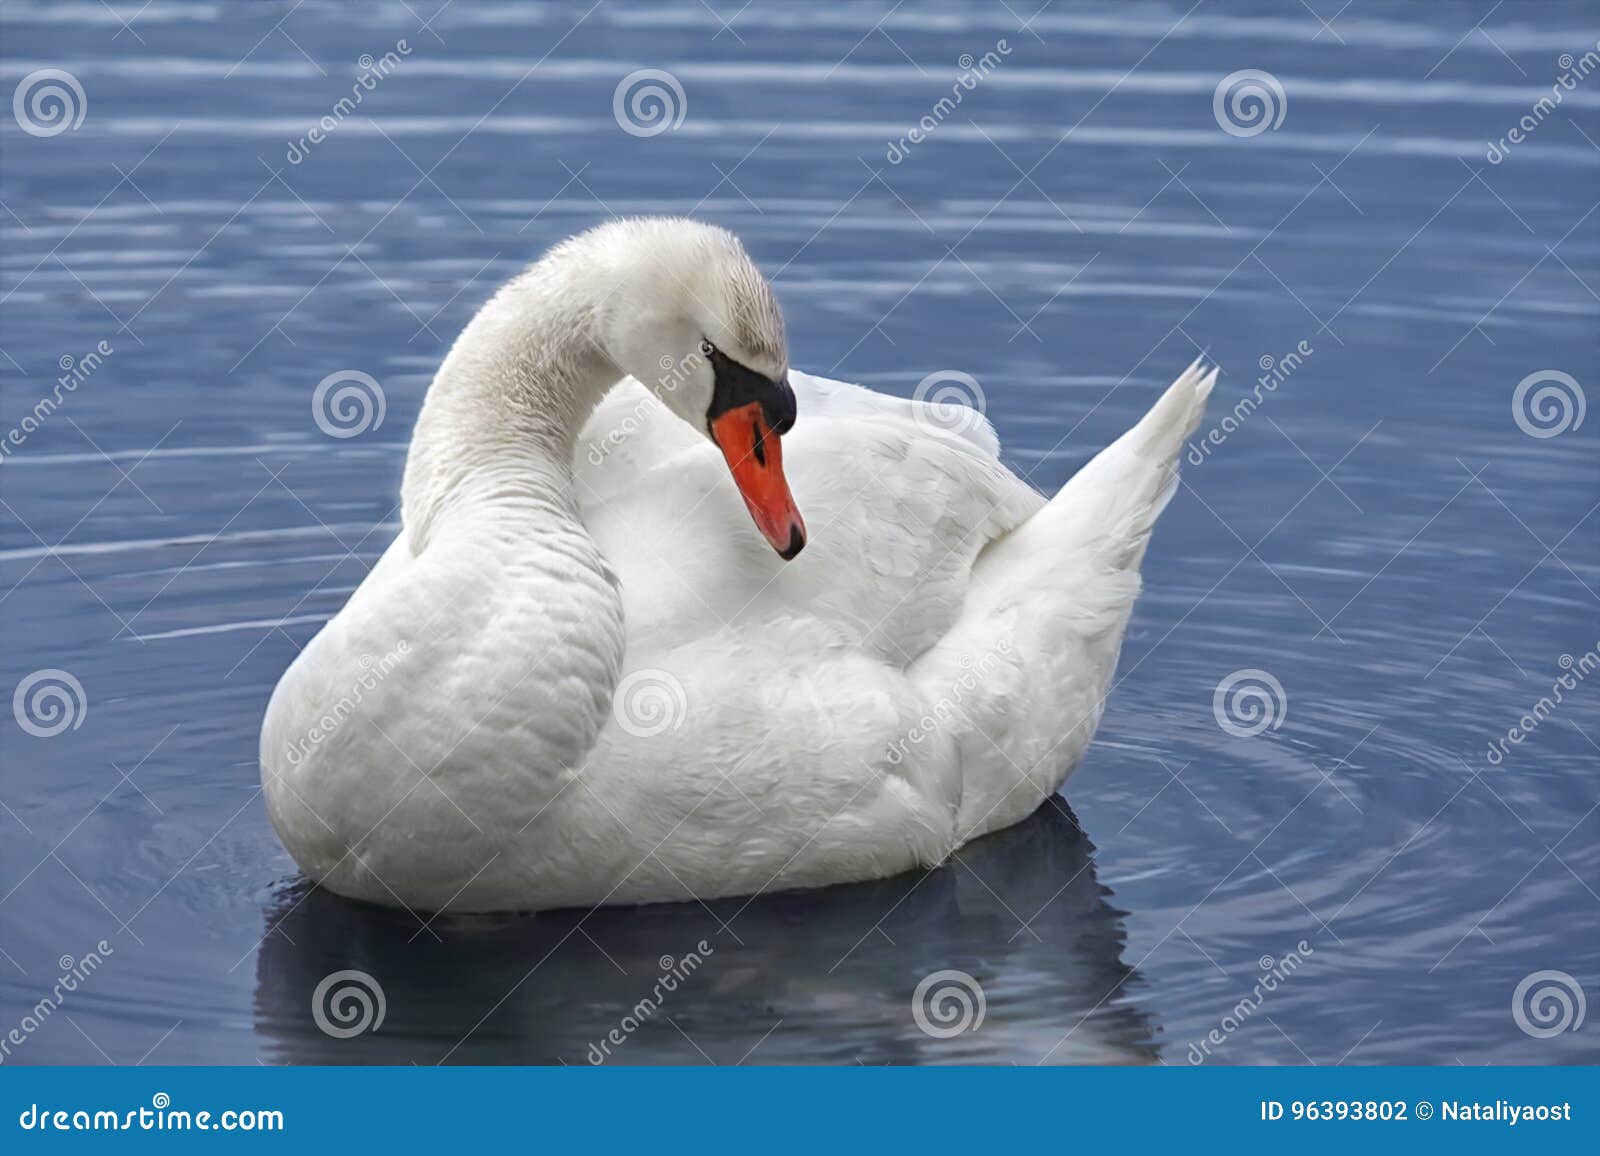 A White Swan Floats in the Water. Stock Photo - Image of crystal, nature:  96393802